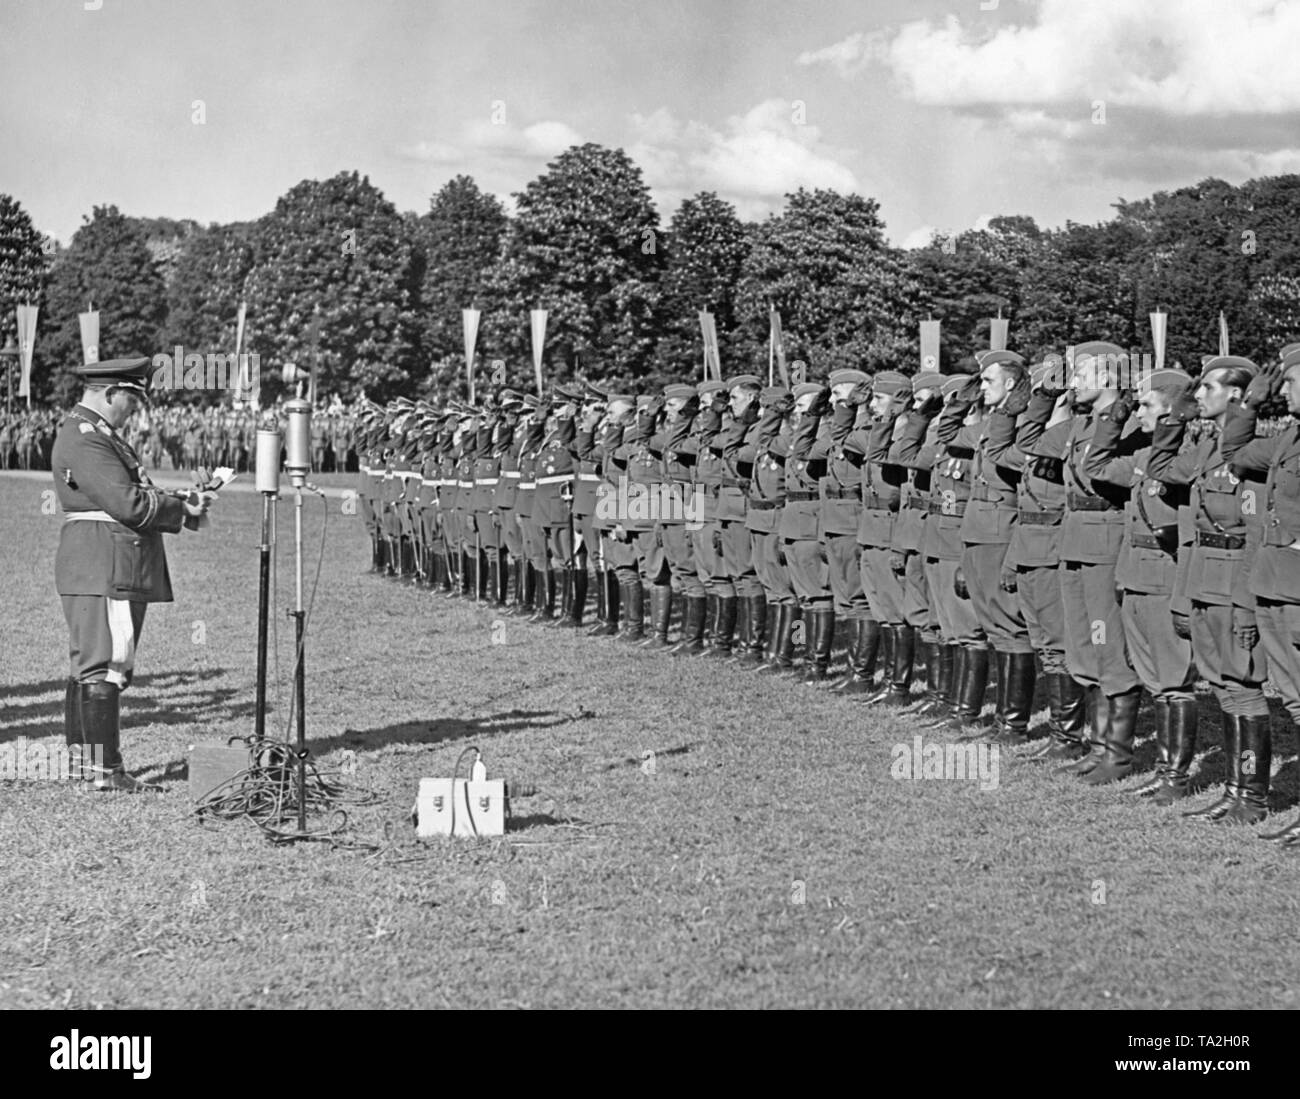 Photo of Field Marshal General Hermann Goering (chief commander of the Luftwaffe) at a speech delivered to pilot officers of the Condor Legion on the occasion of a victory parade in the Hamburg Moorweide at the Dammtor. The officers on the right are saluting. Stock Photo